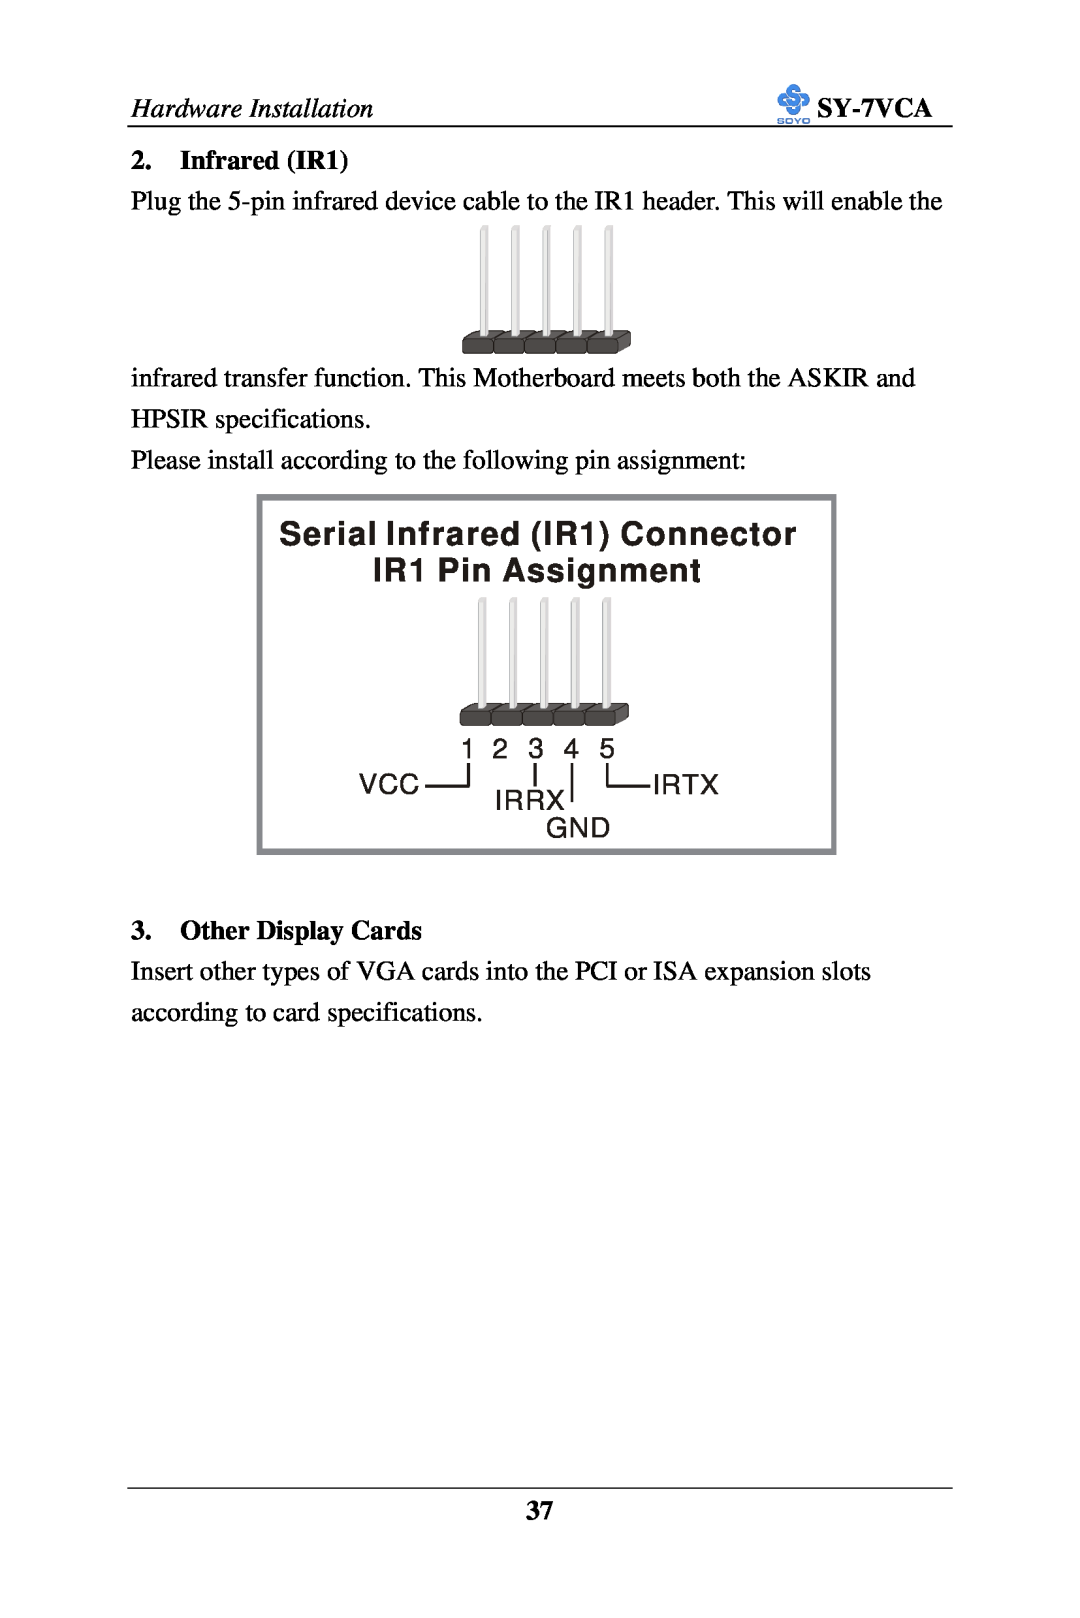 SOYO SY-7VCA user manual Serial Infrared IR1 Connector IR1 Pin Assignment, 1 2 3 4, Irrx Gnd, Irtx 